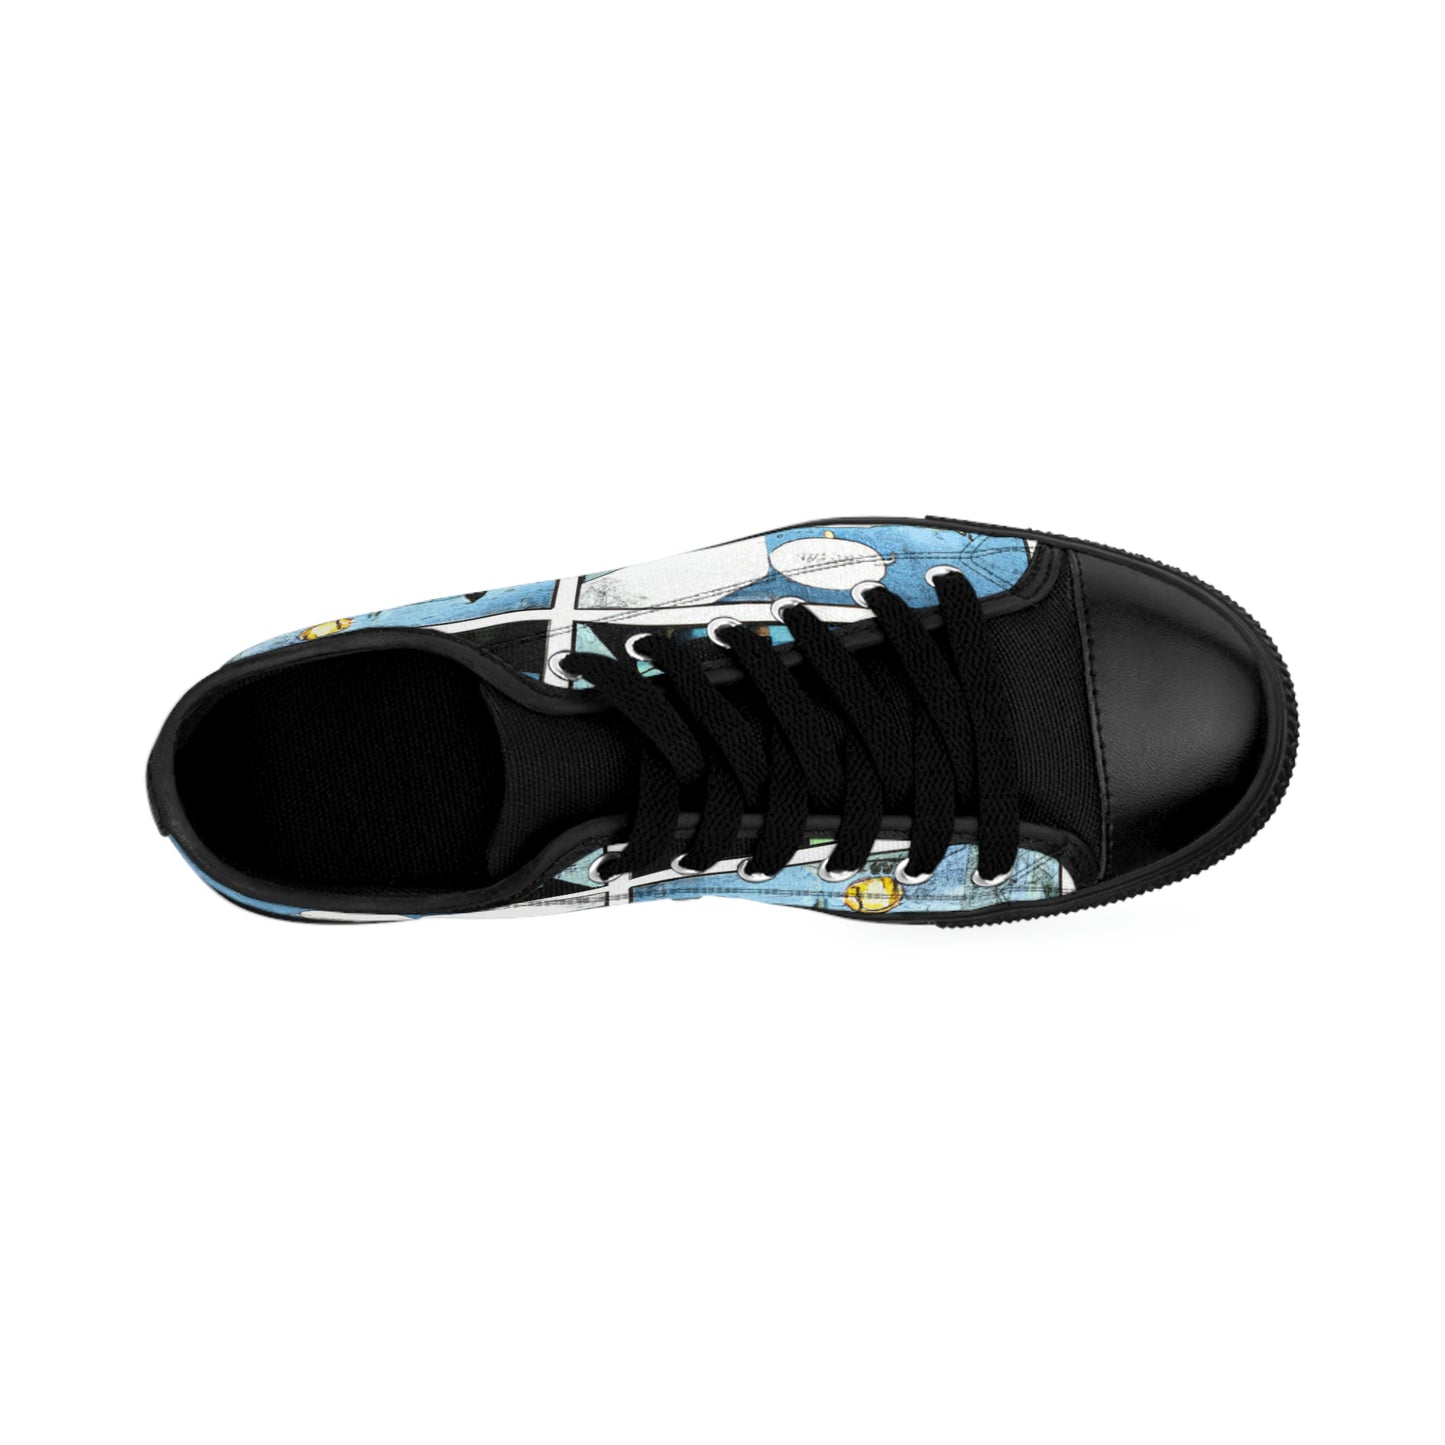 Winifred Shoelace - Comic Book Low Top